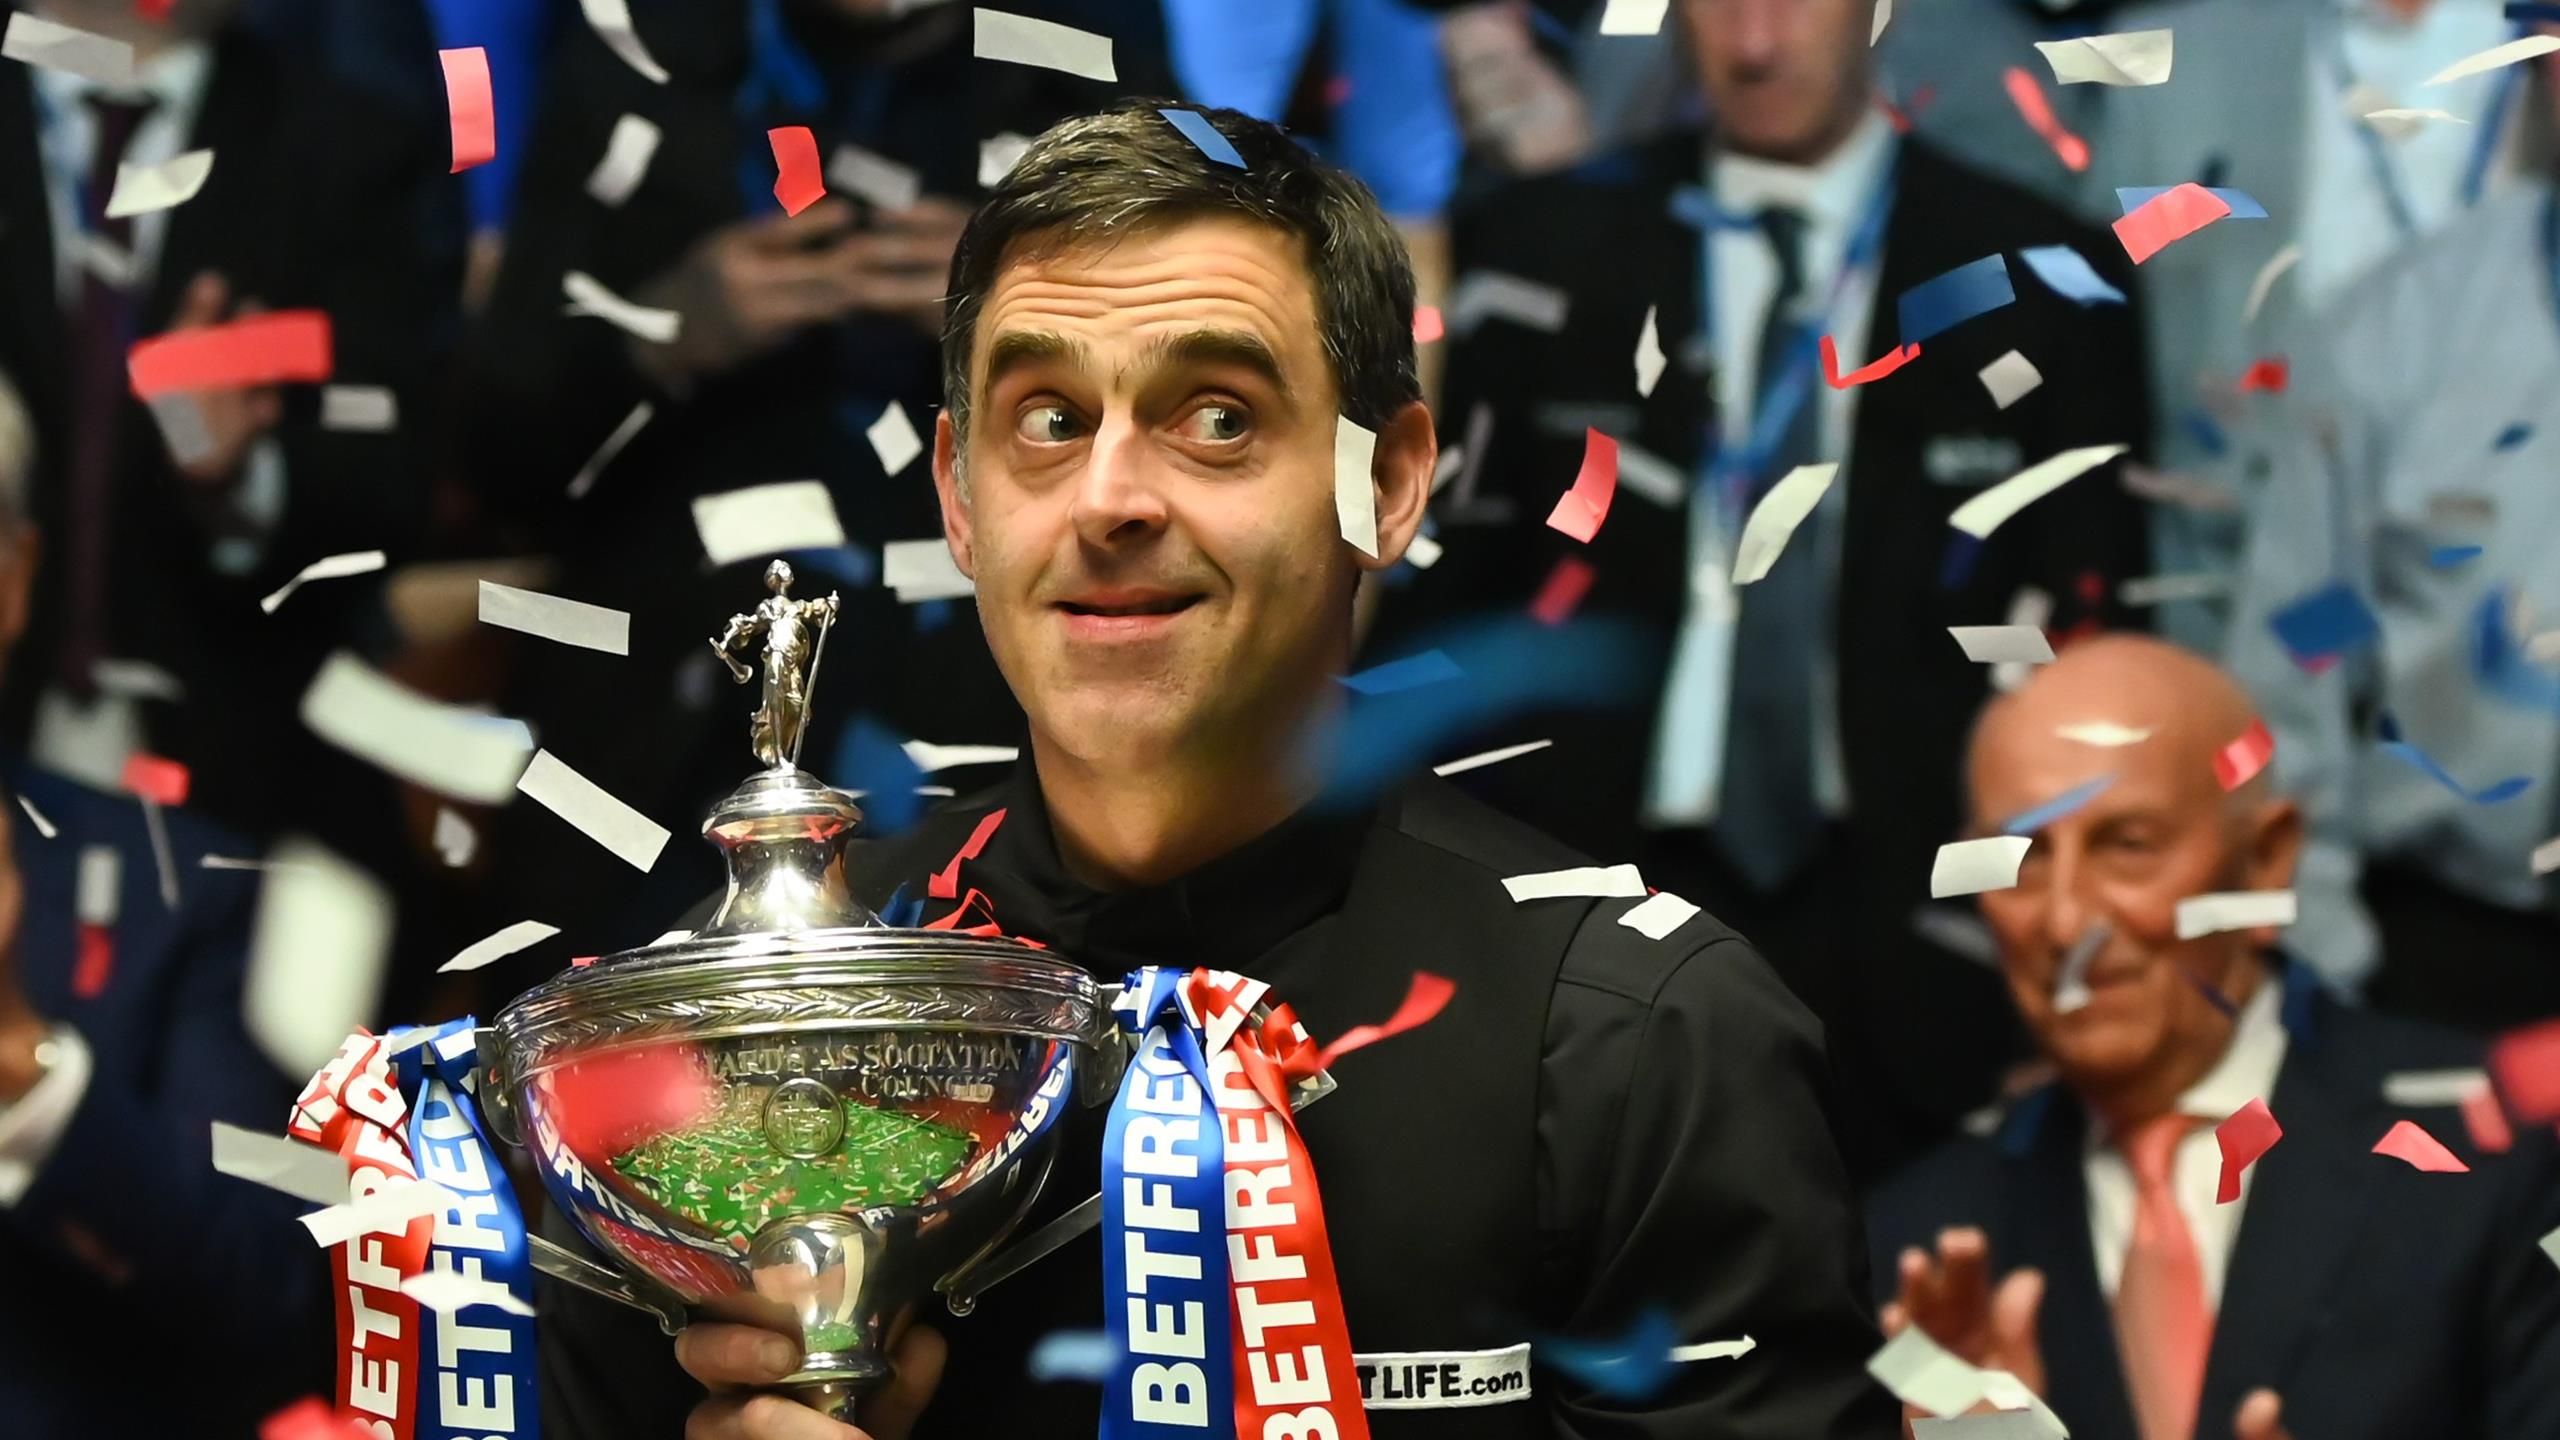 World Mixed Doubles snooker Dates, schedule, format, how to watch, teams, Ronnie OSullivan teams up with Reanne Evans